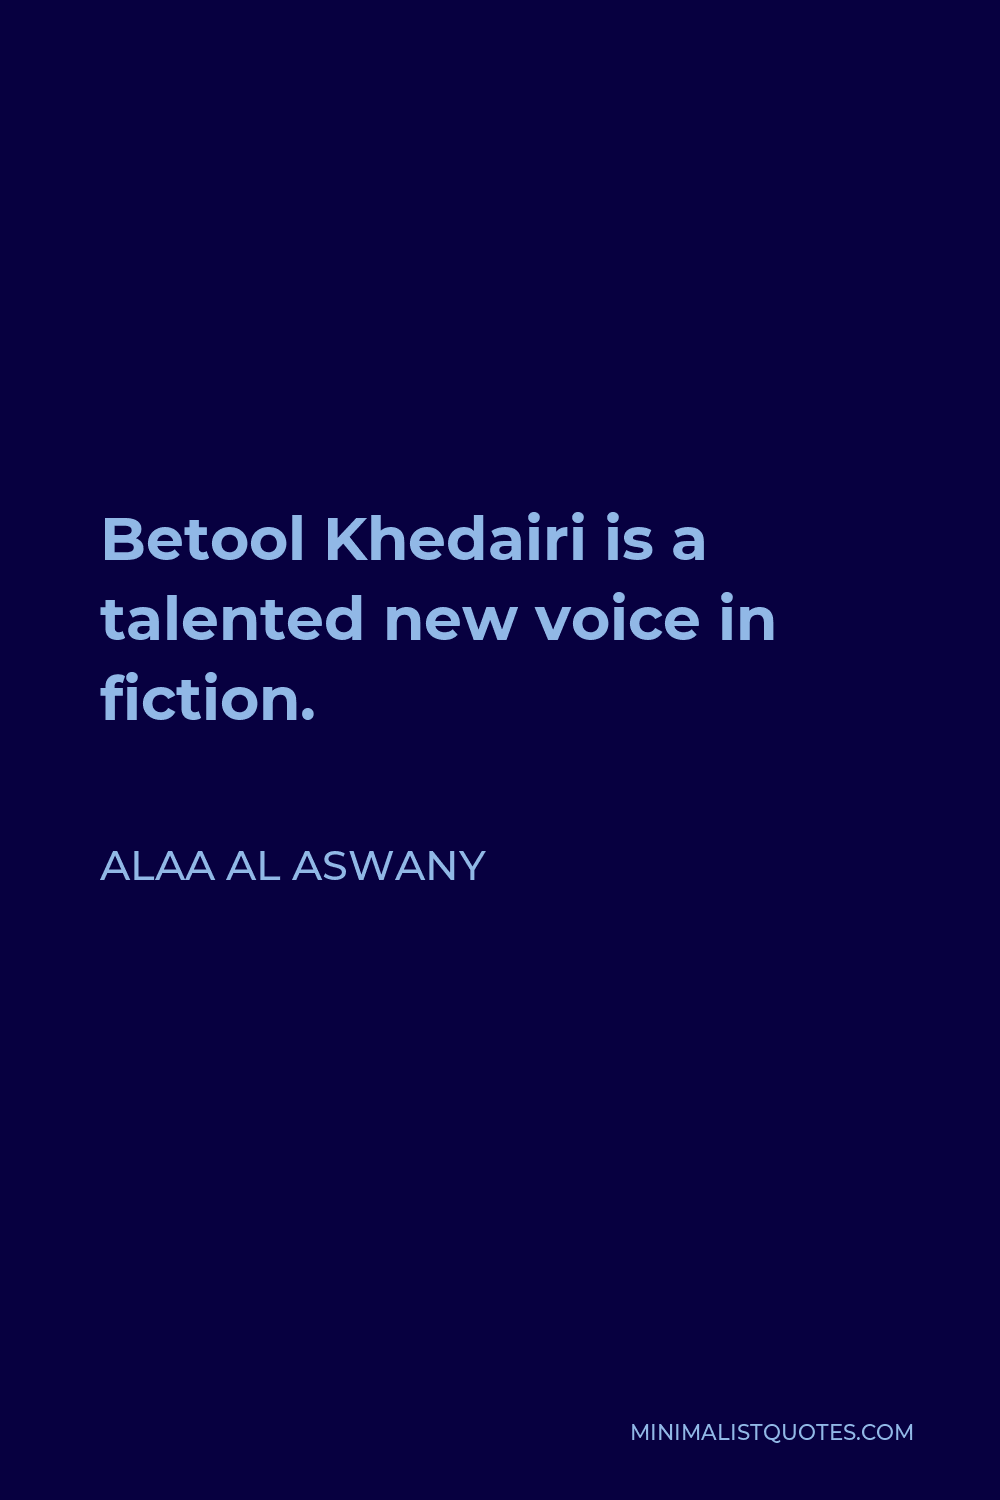 Alaa Al Aswany Quote - Betool Khedairi is a talented new voice in fiction.